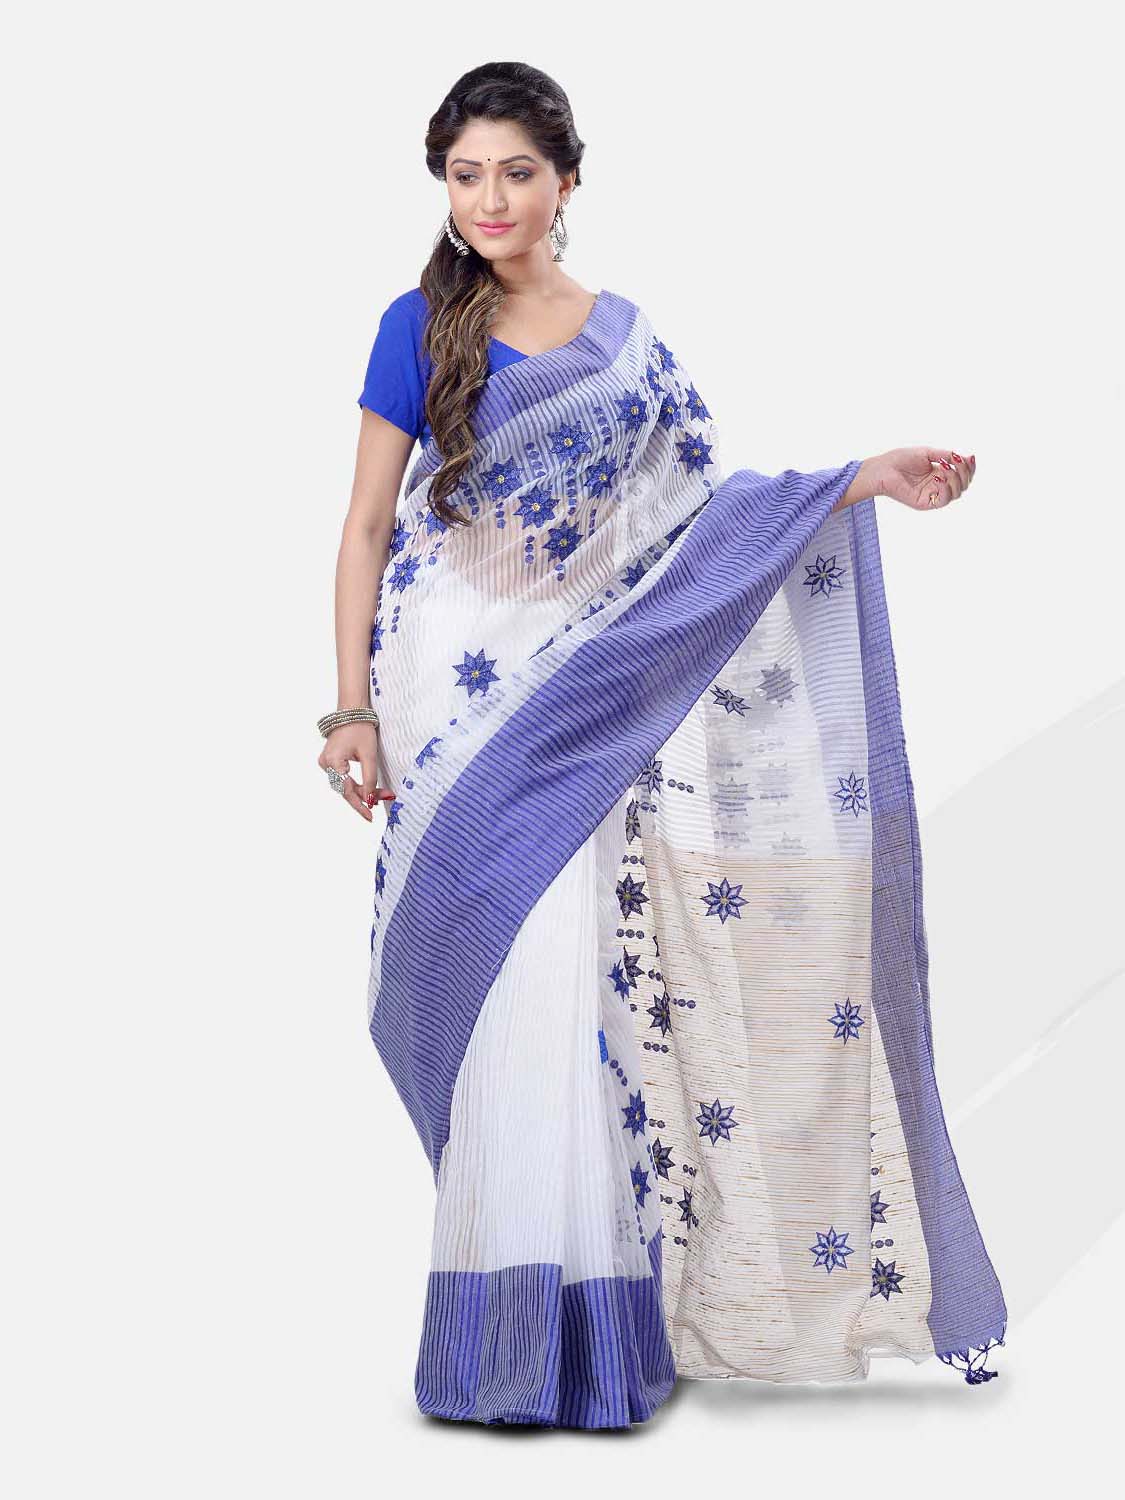  Pure Cotton Handloom Traditional Khadi Bengali Tant Saree Very Soft Cotton Materials Star Design With Blouse Piece (Blue White)   